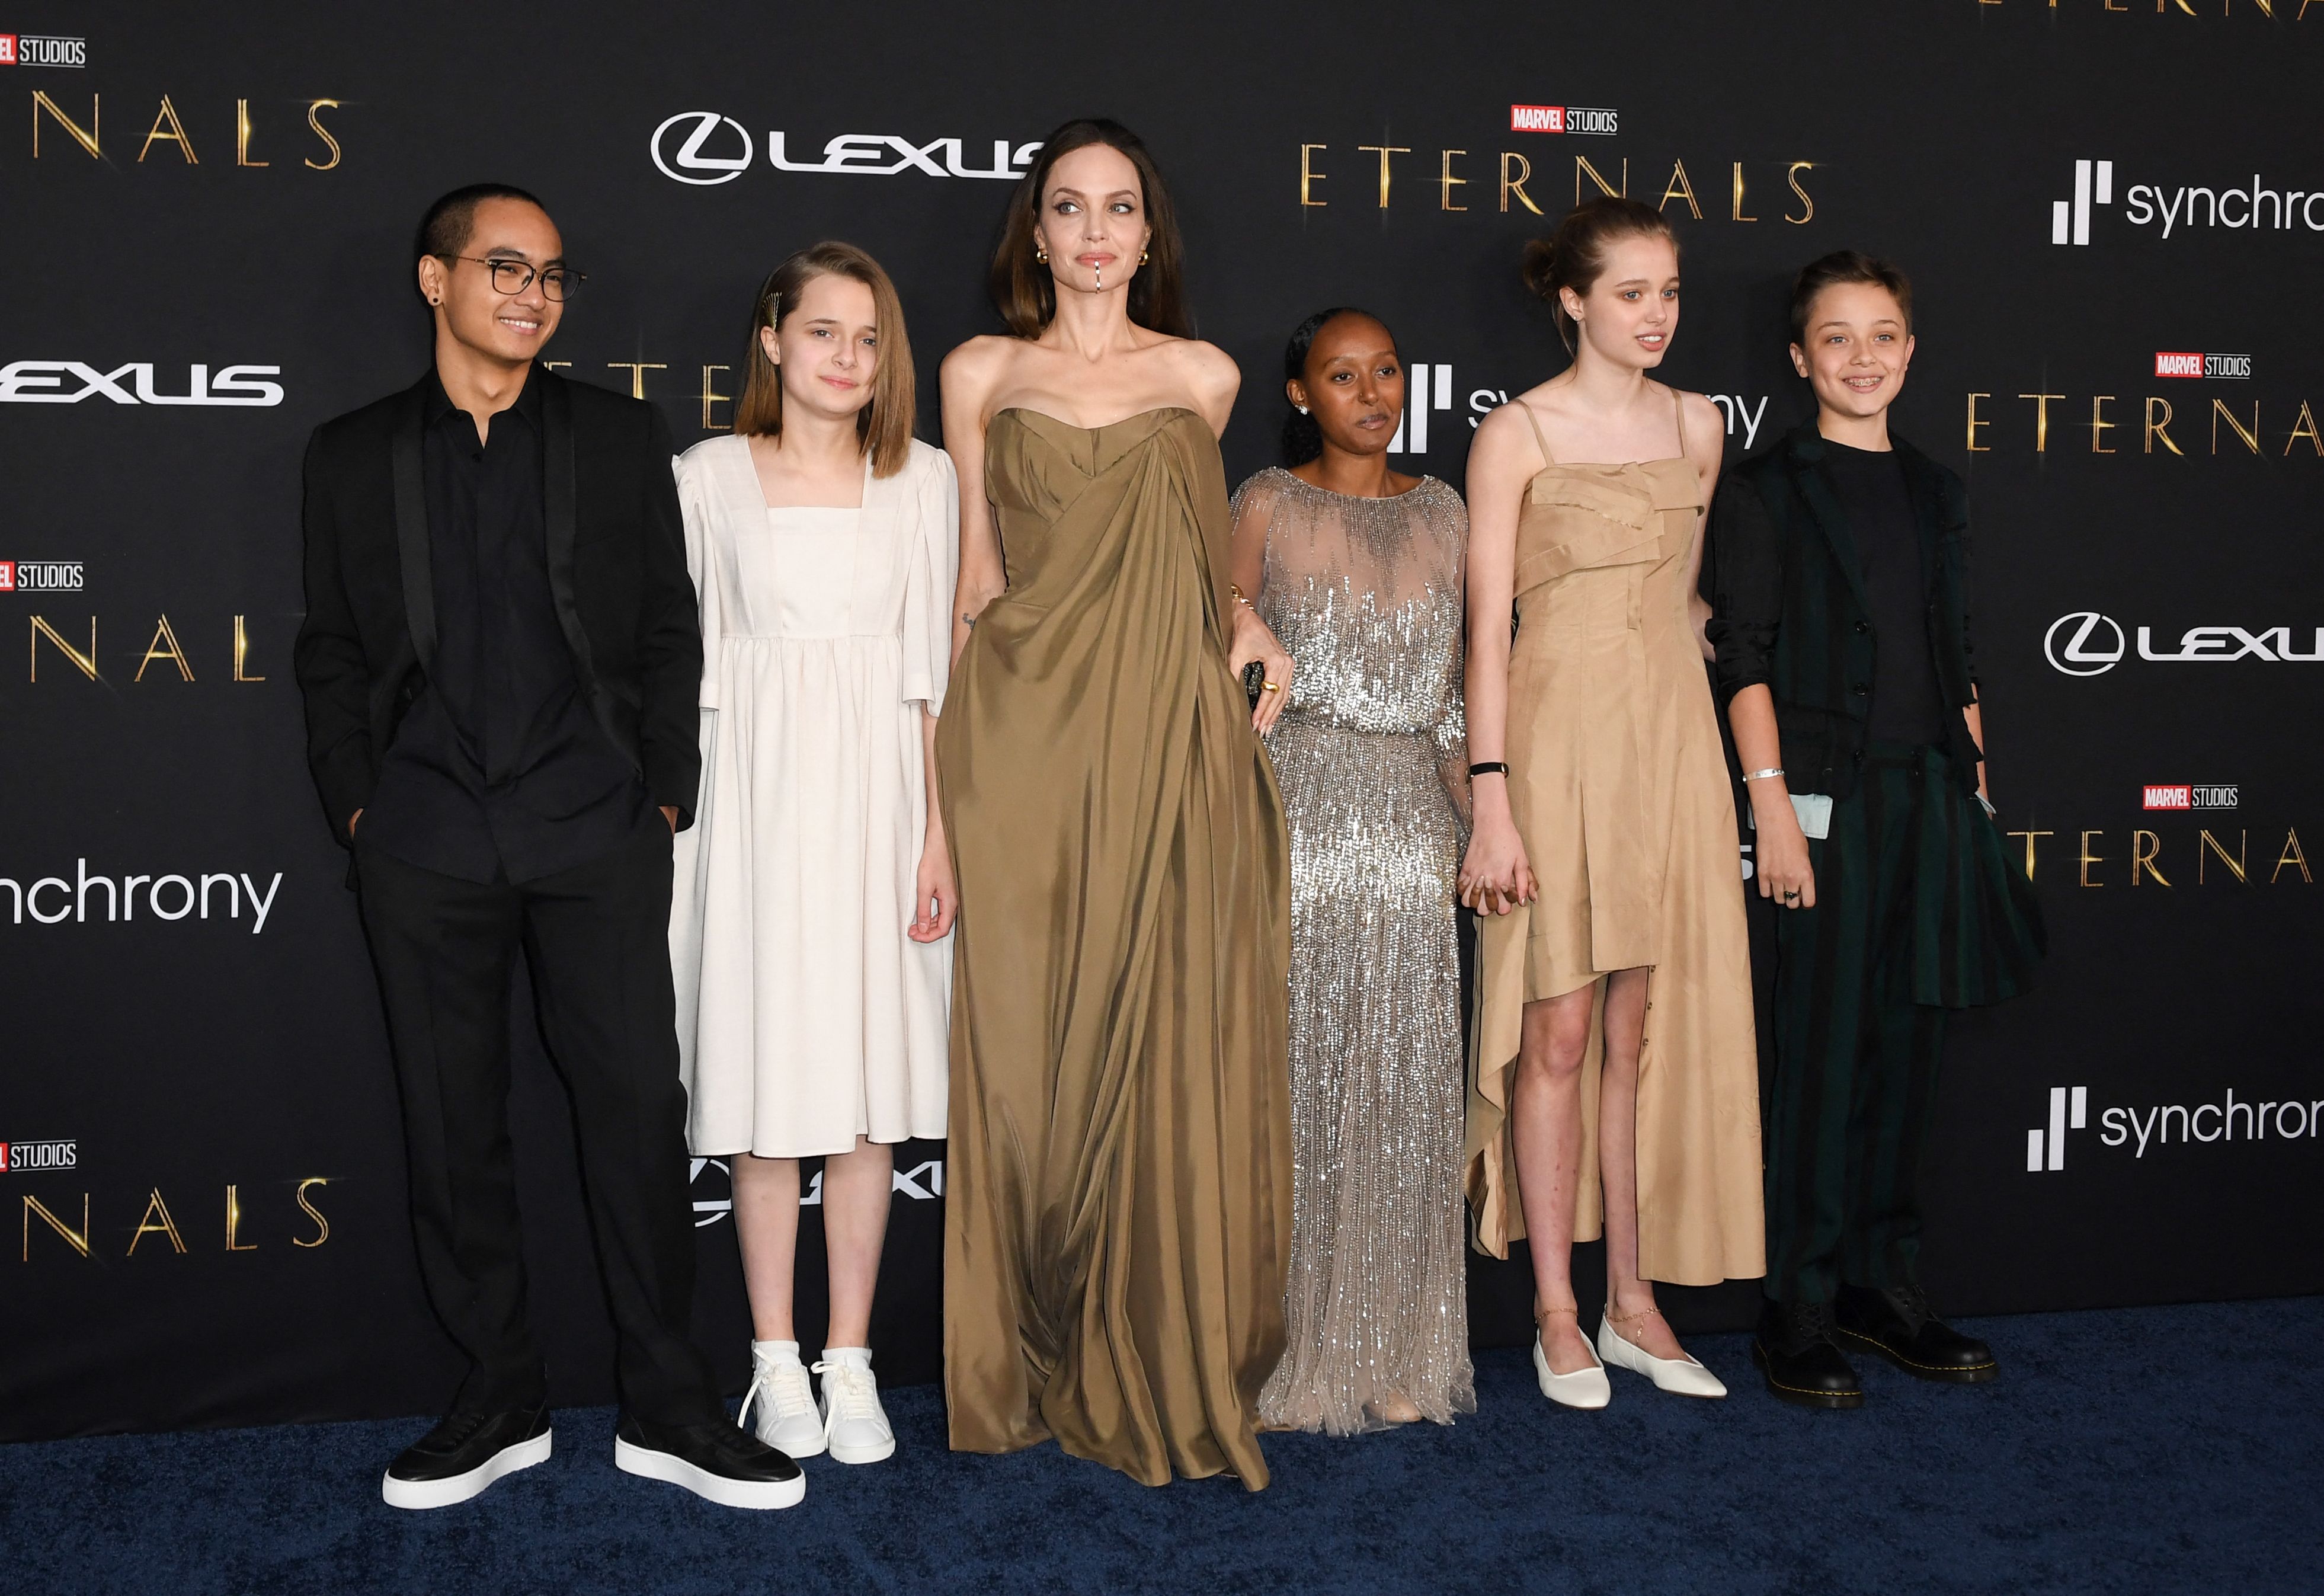 Angelina Jolie attends Eternals premiere with her five children, makes it a family night out. See pics - Hindustan Times